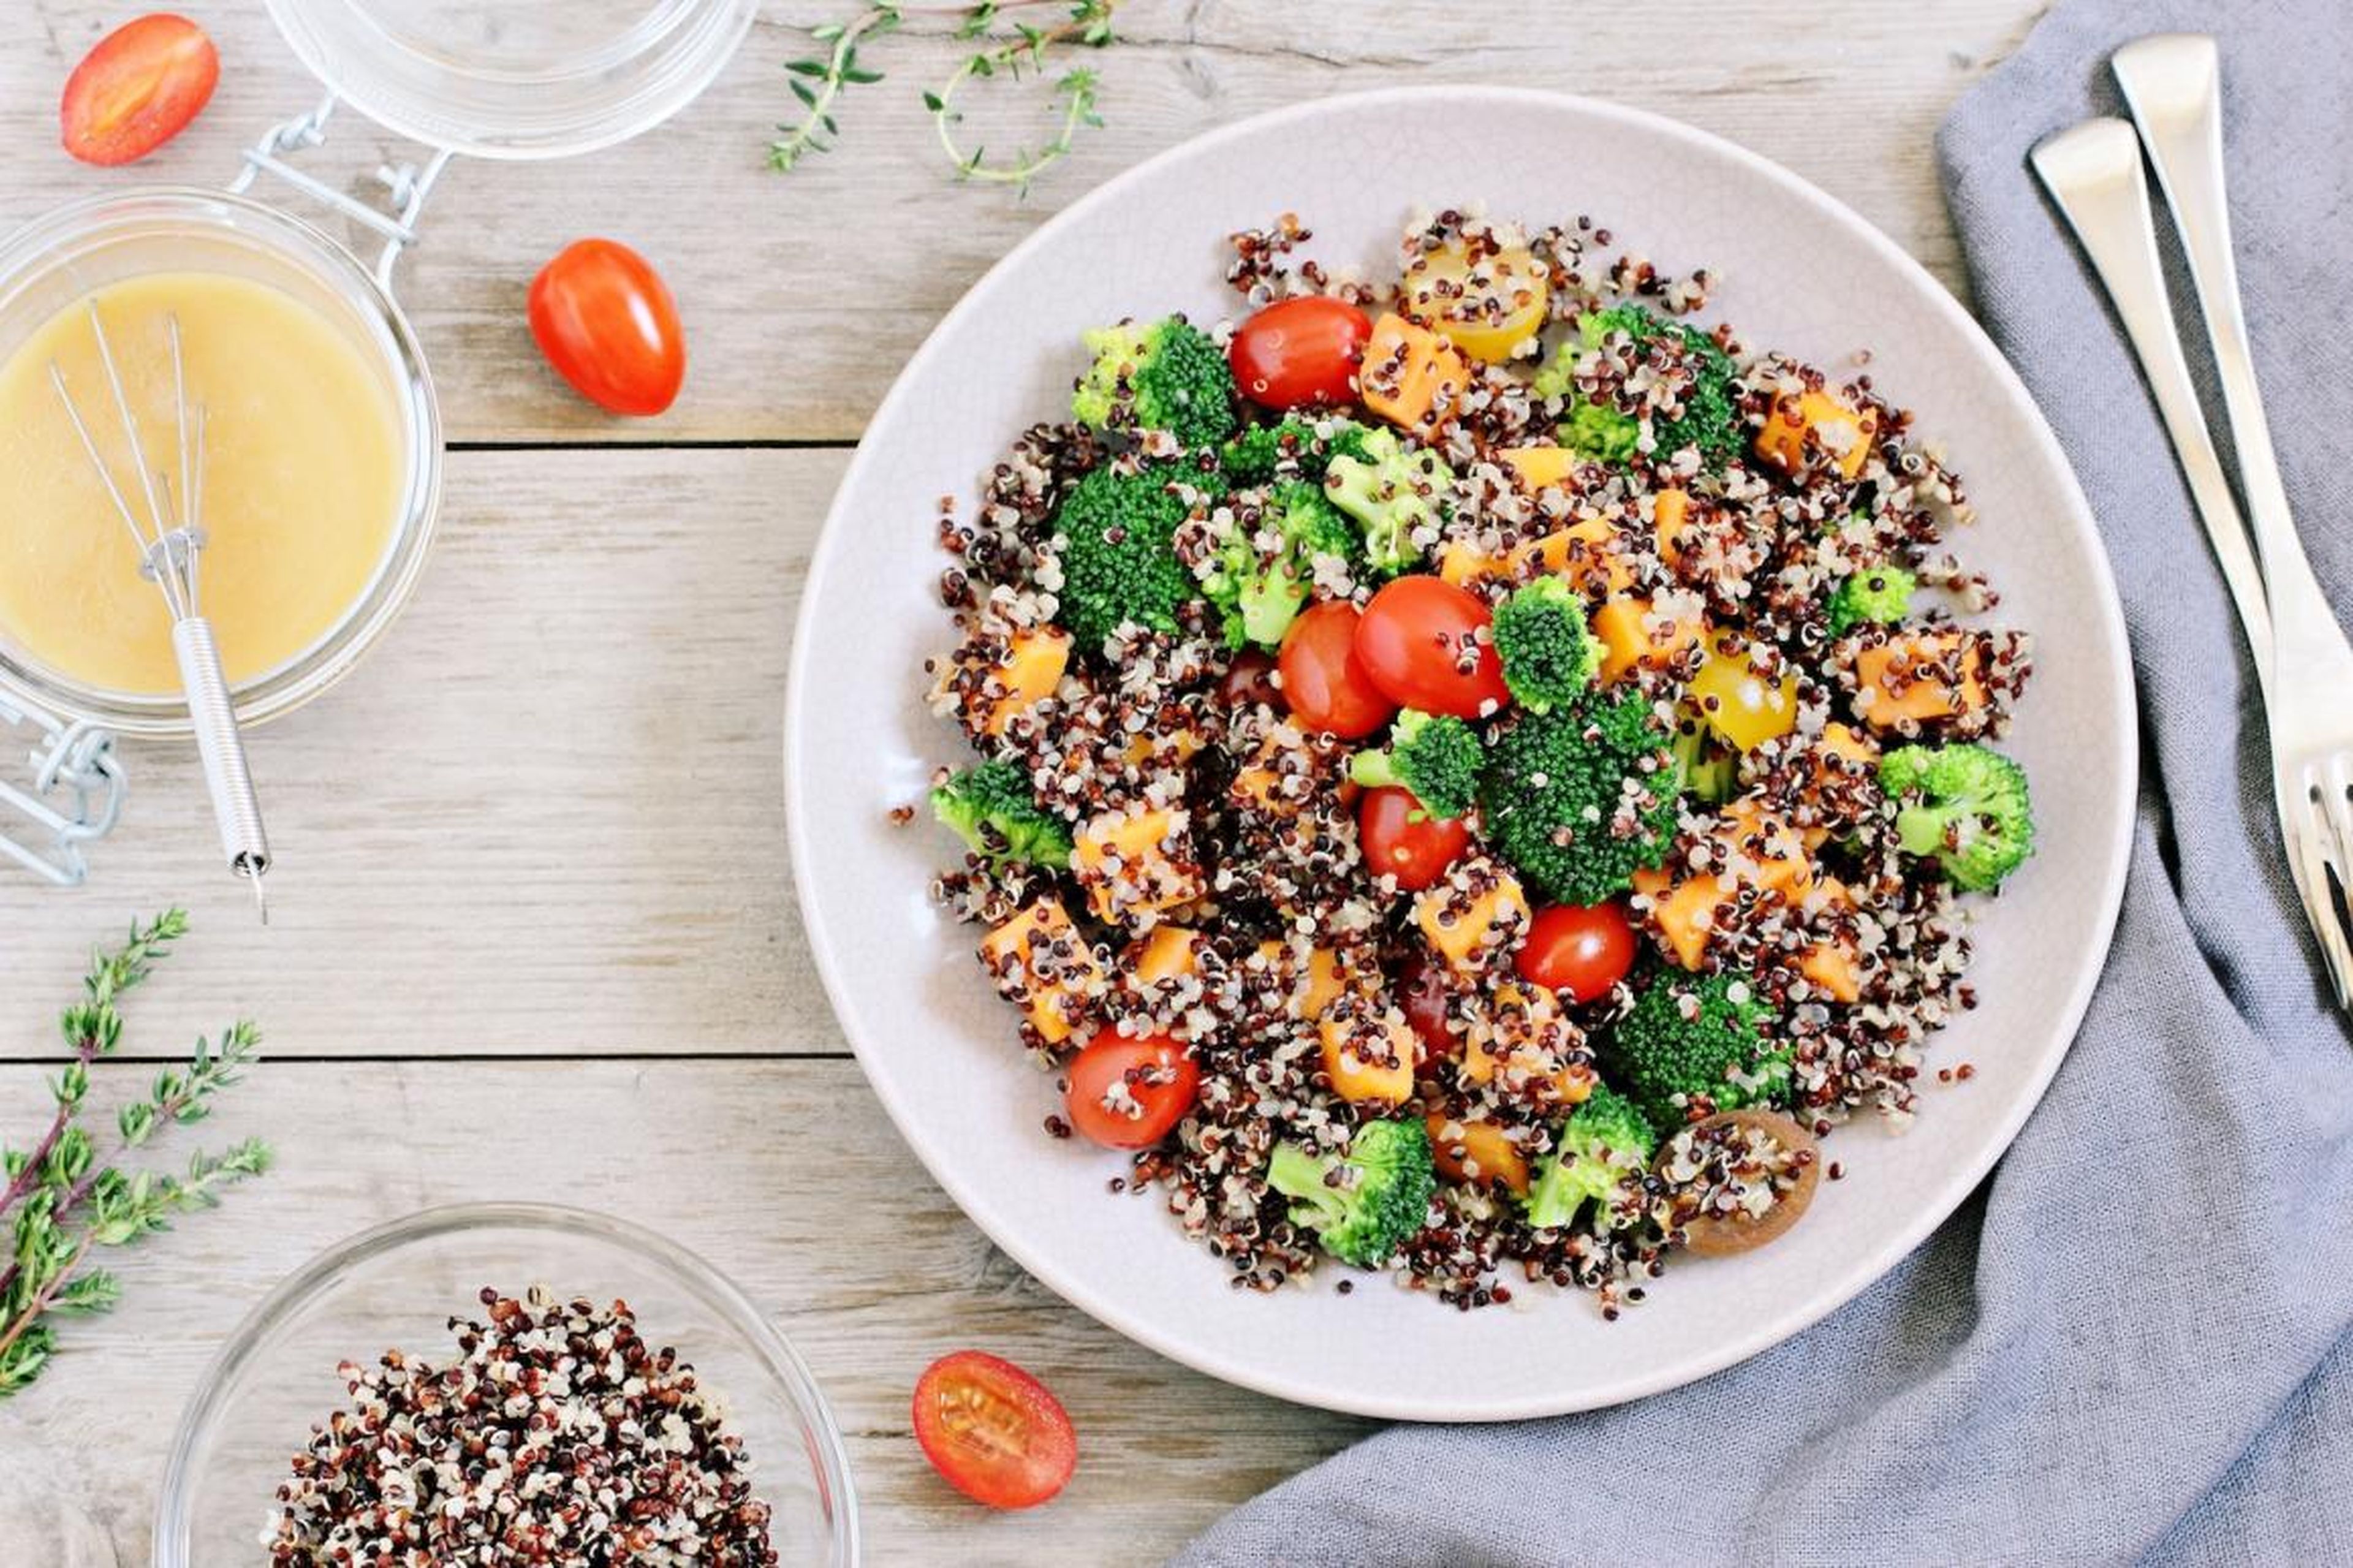 Foods like quinoa and broccoli are good sources of fiber, which keeps the GI tract moving.